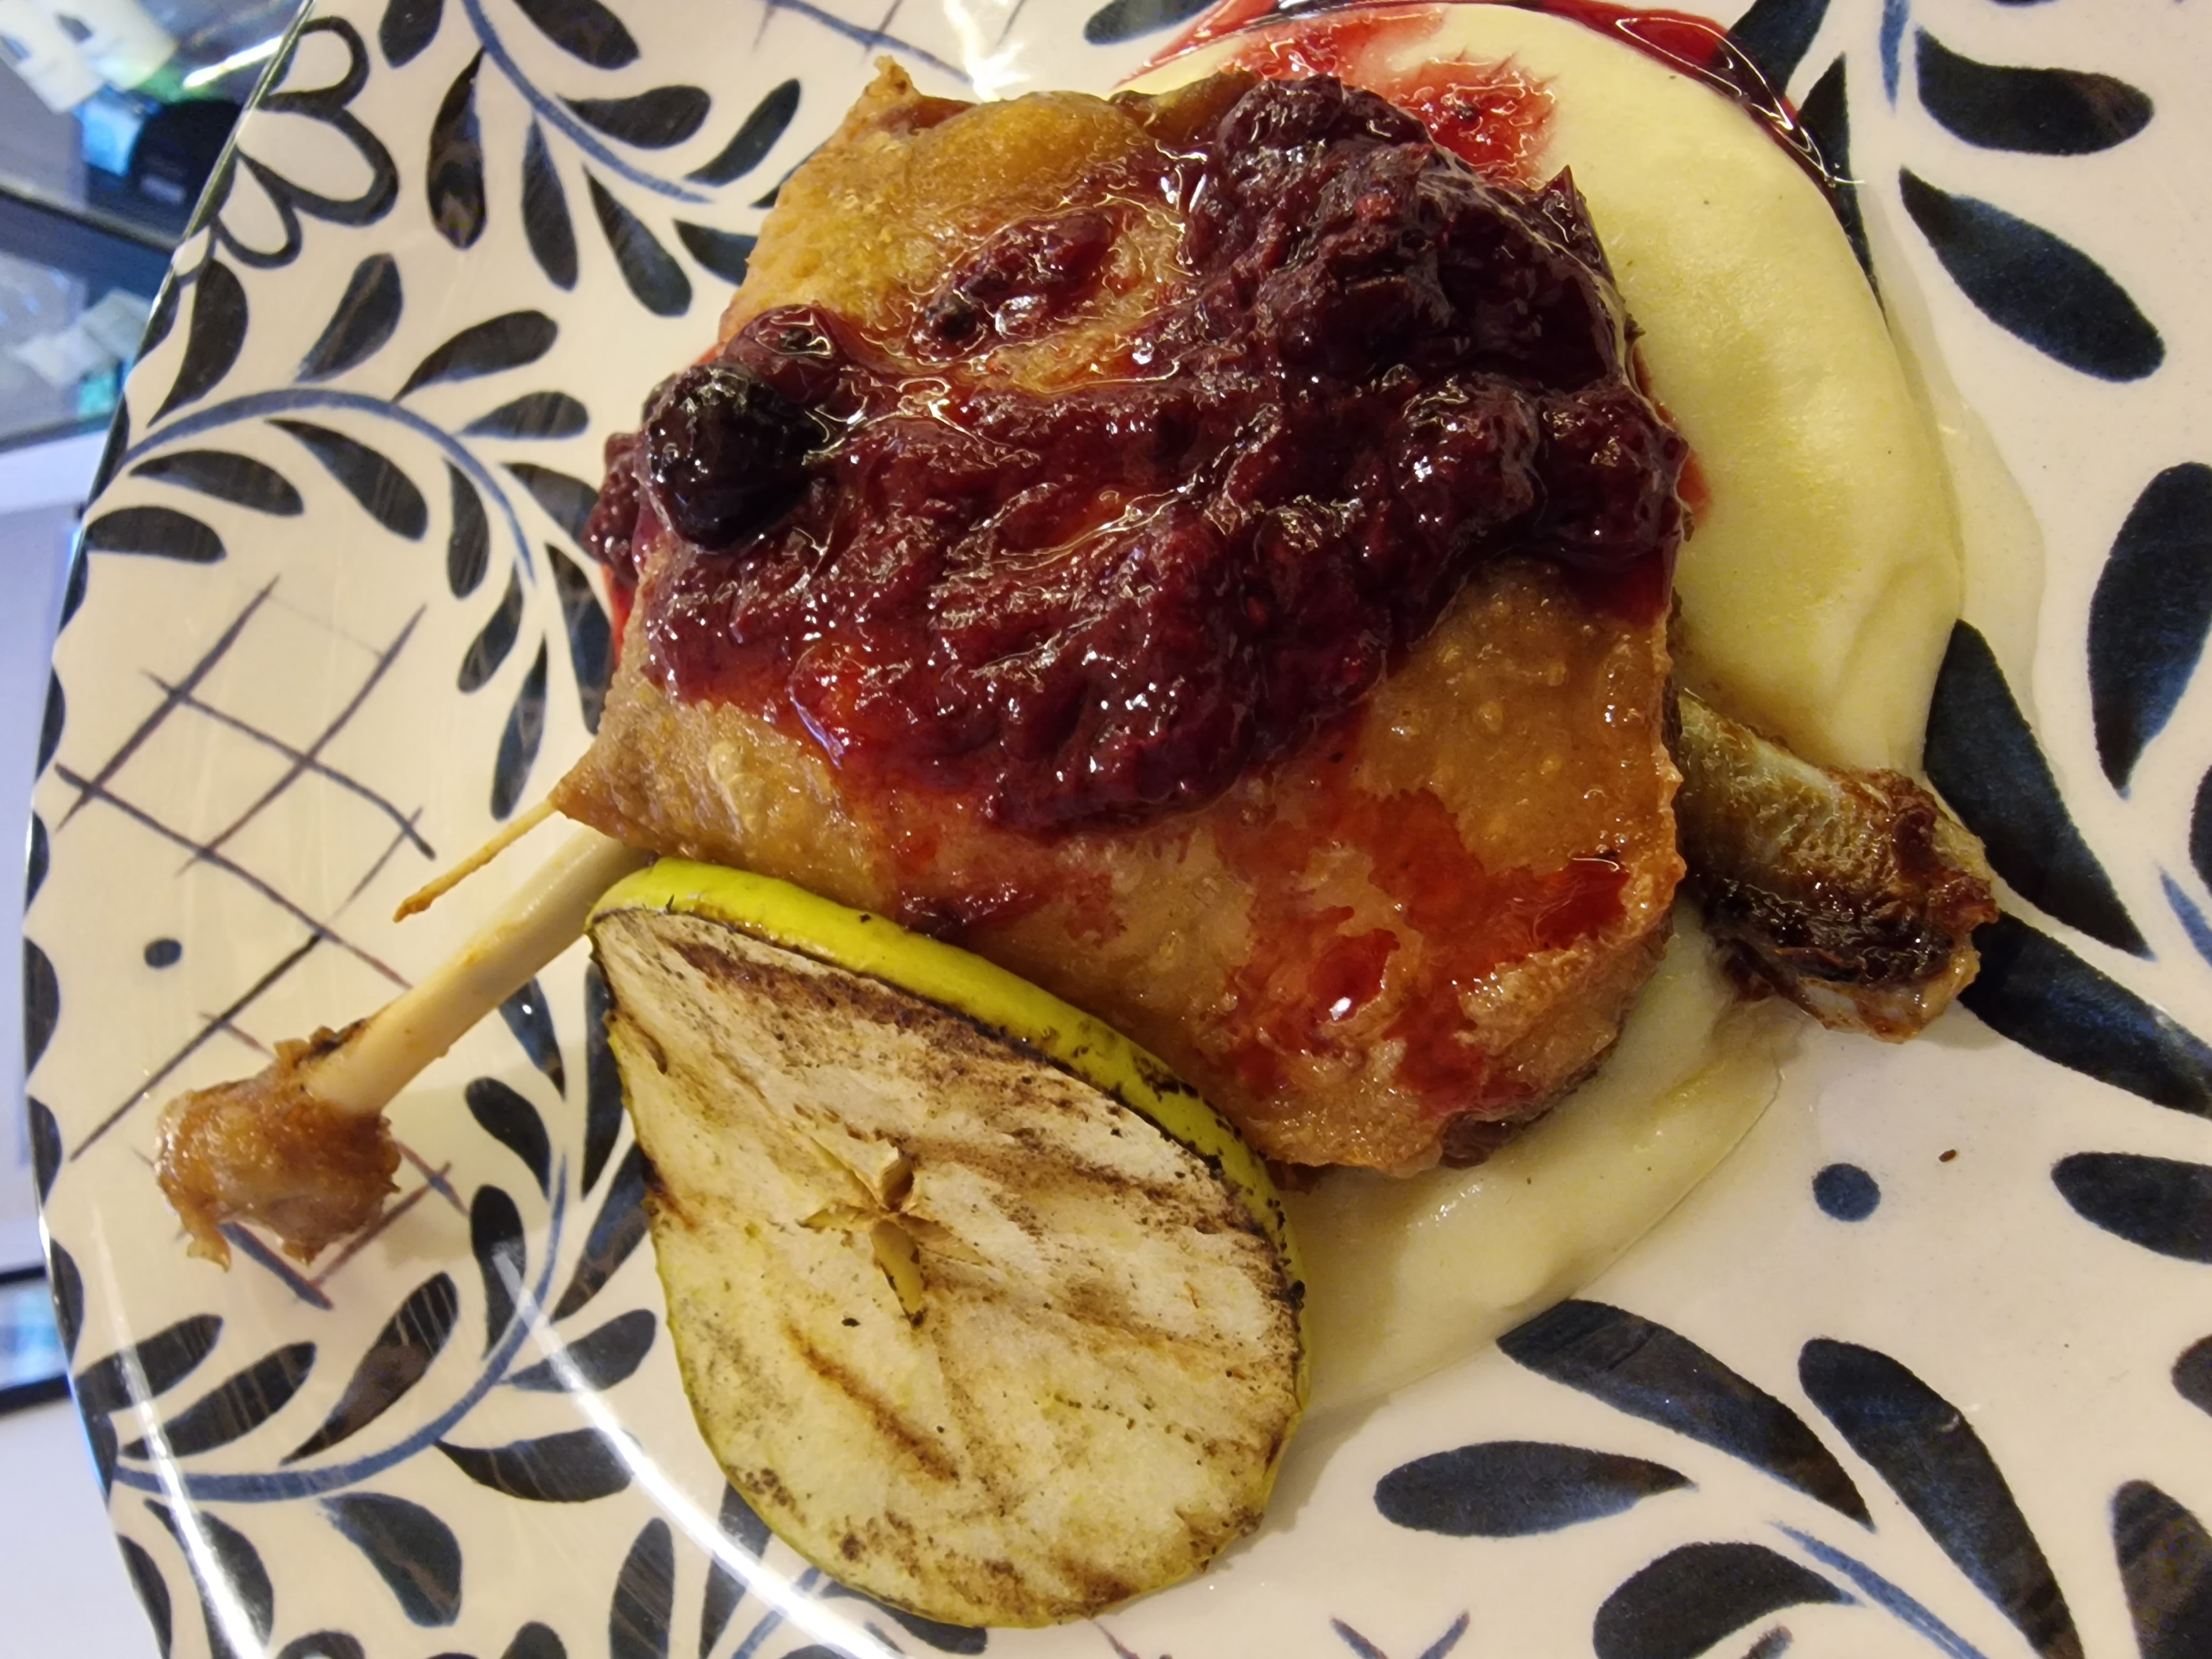 Duck confit with red berries sauce and creamy puree